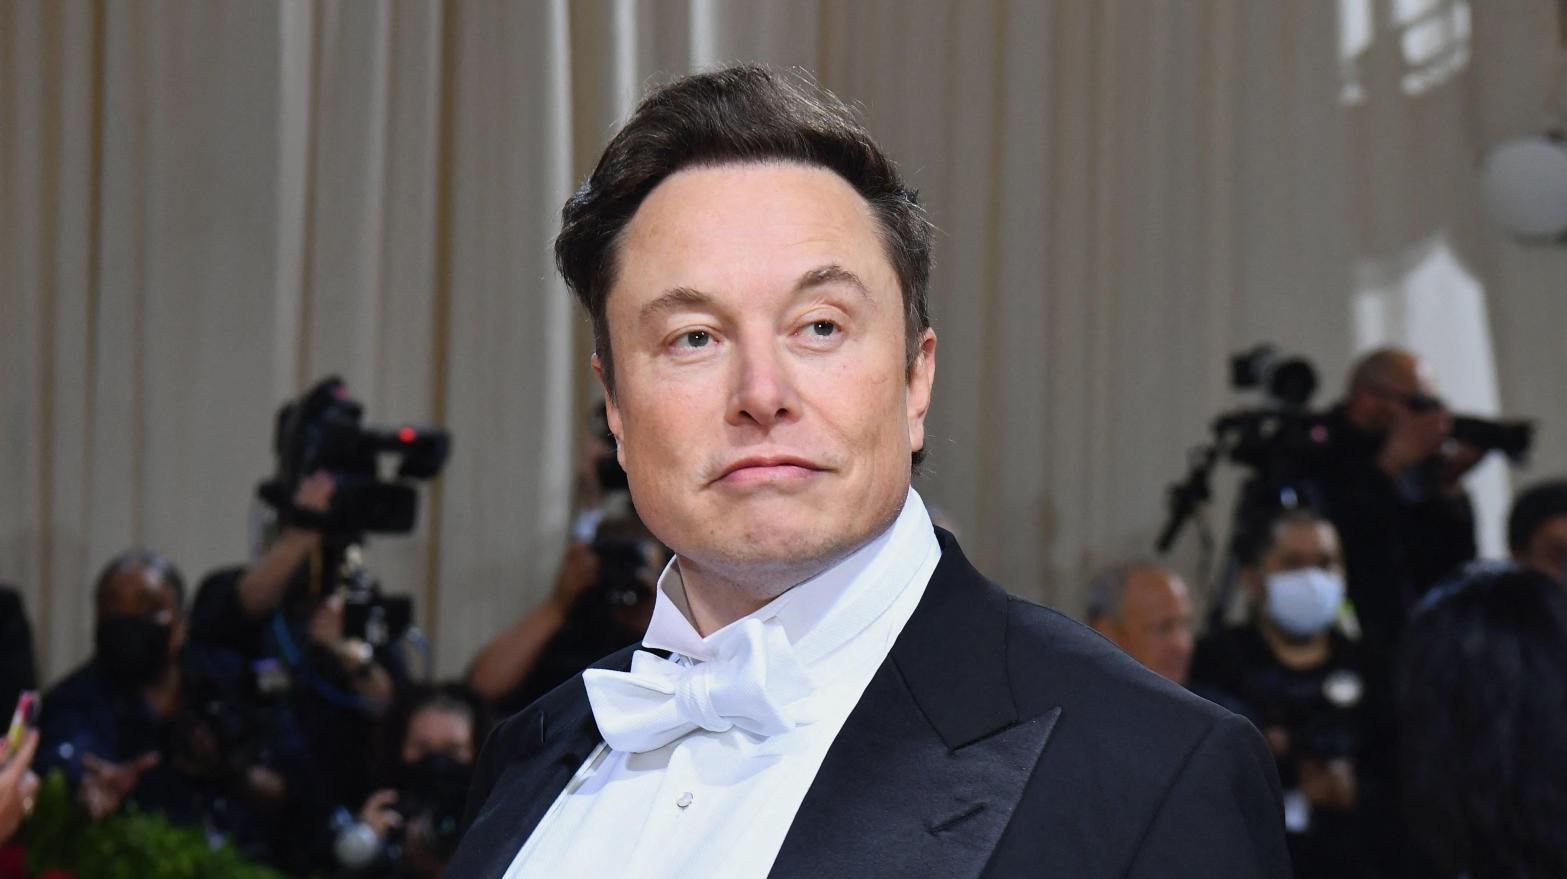 Tesla CEO Elon Musk might not be Twitter's new owner at the rate he's going. (Photo: Angela Weiss / AFP, Getty Images)